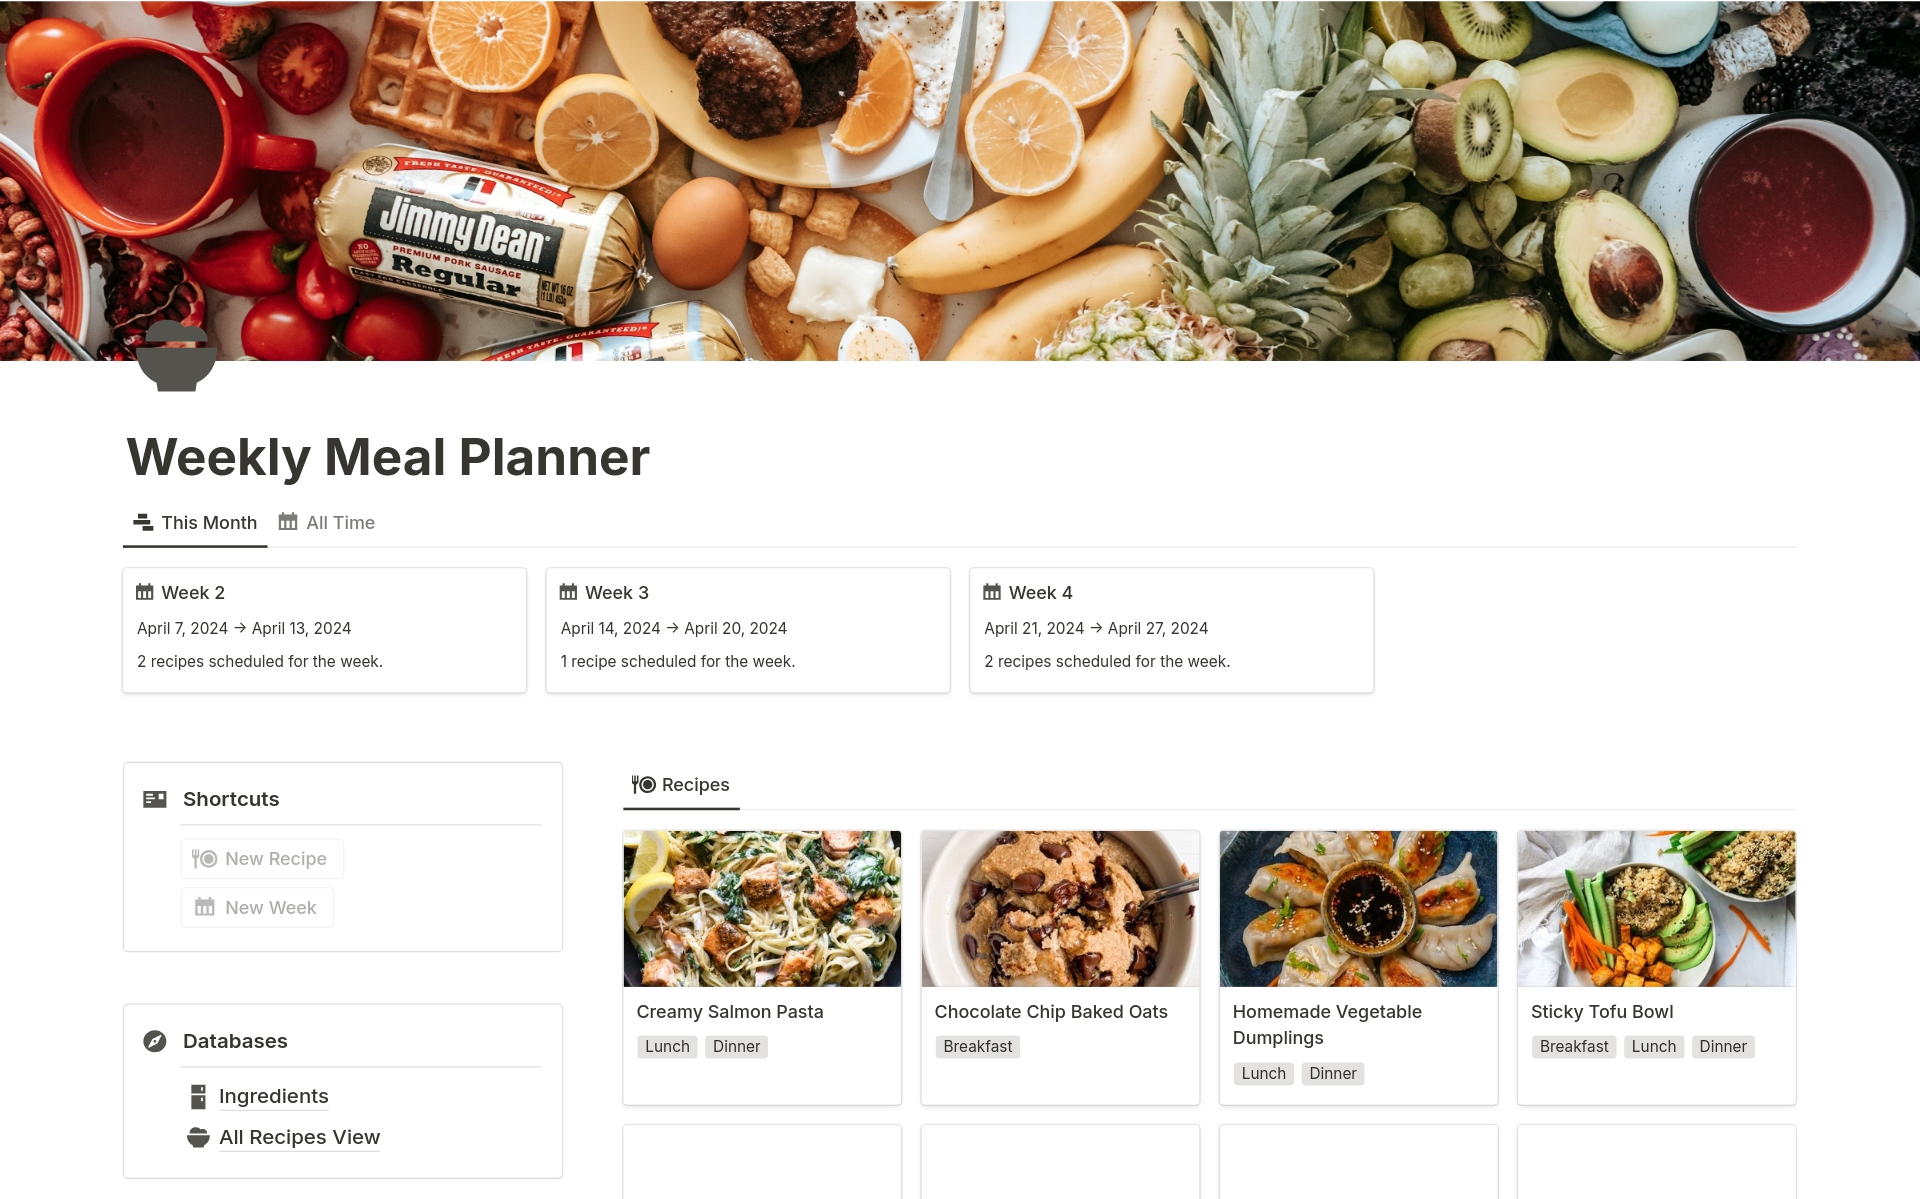 This Weekly Meal Planner is an antidote to the chaos of culinary logistics. With this template, you can streamline your meal planning process by organizing recipes, coordinating ingredient lists, and simplifying your shopping experience—all in one place.